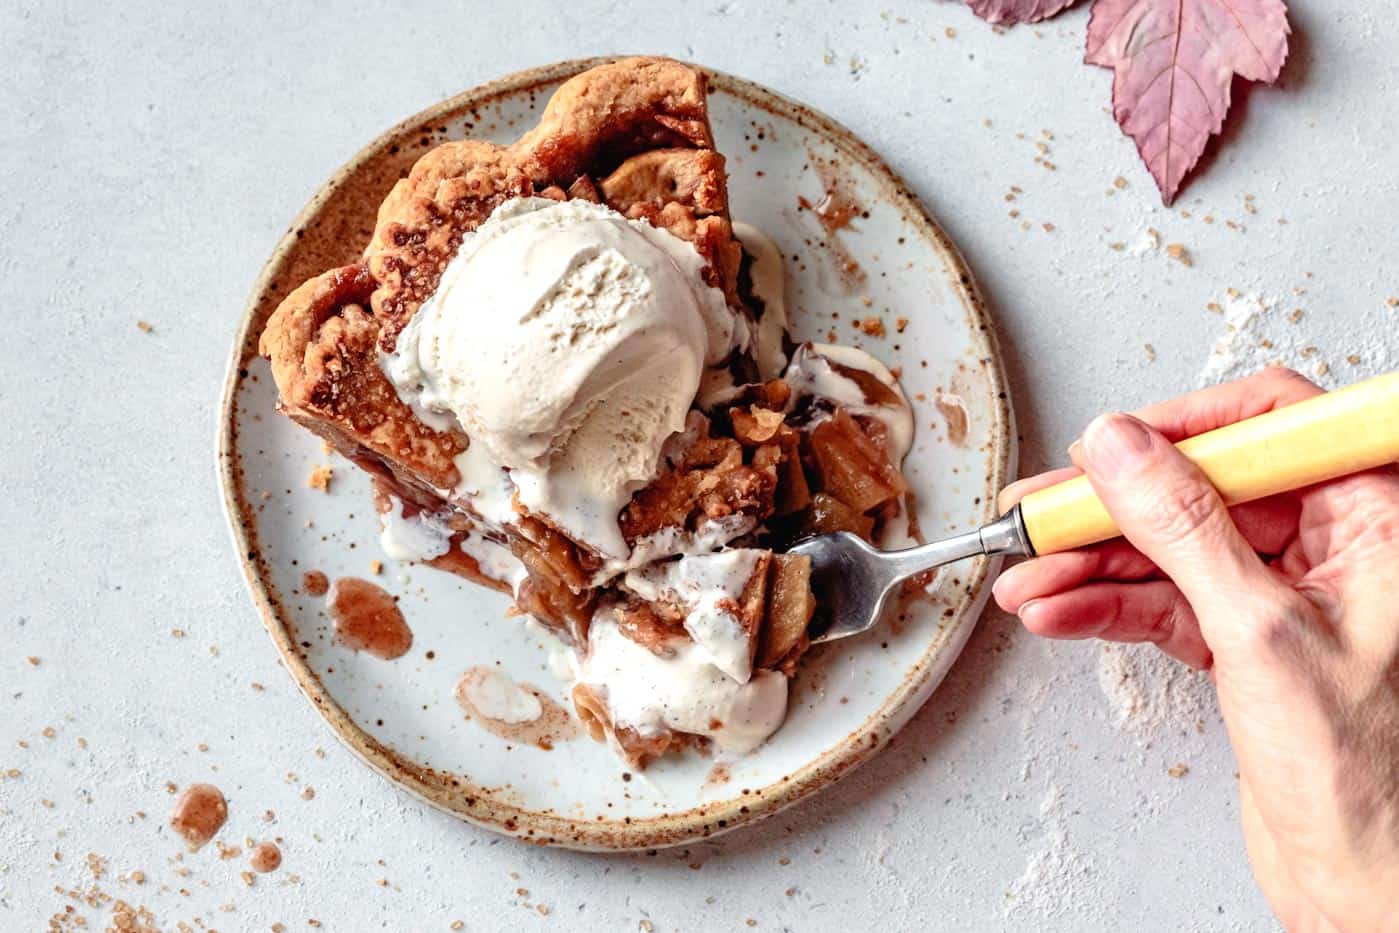 forking into a slice of gooey paleo apple pie and ice cream